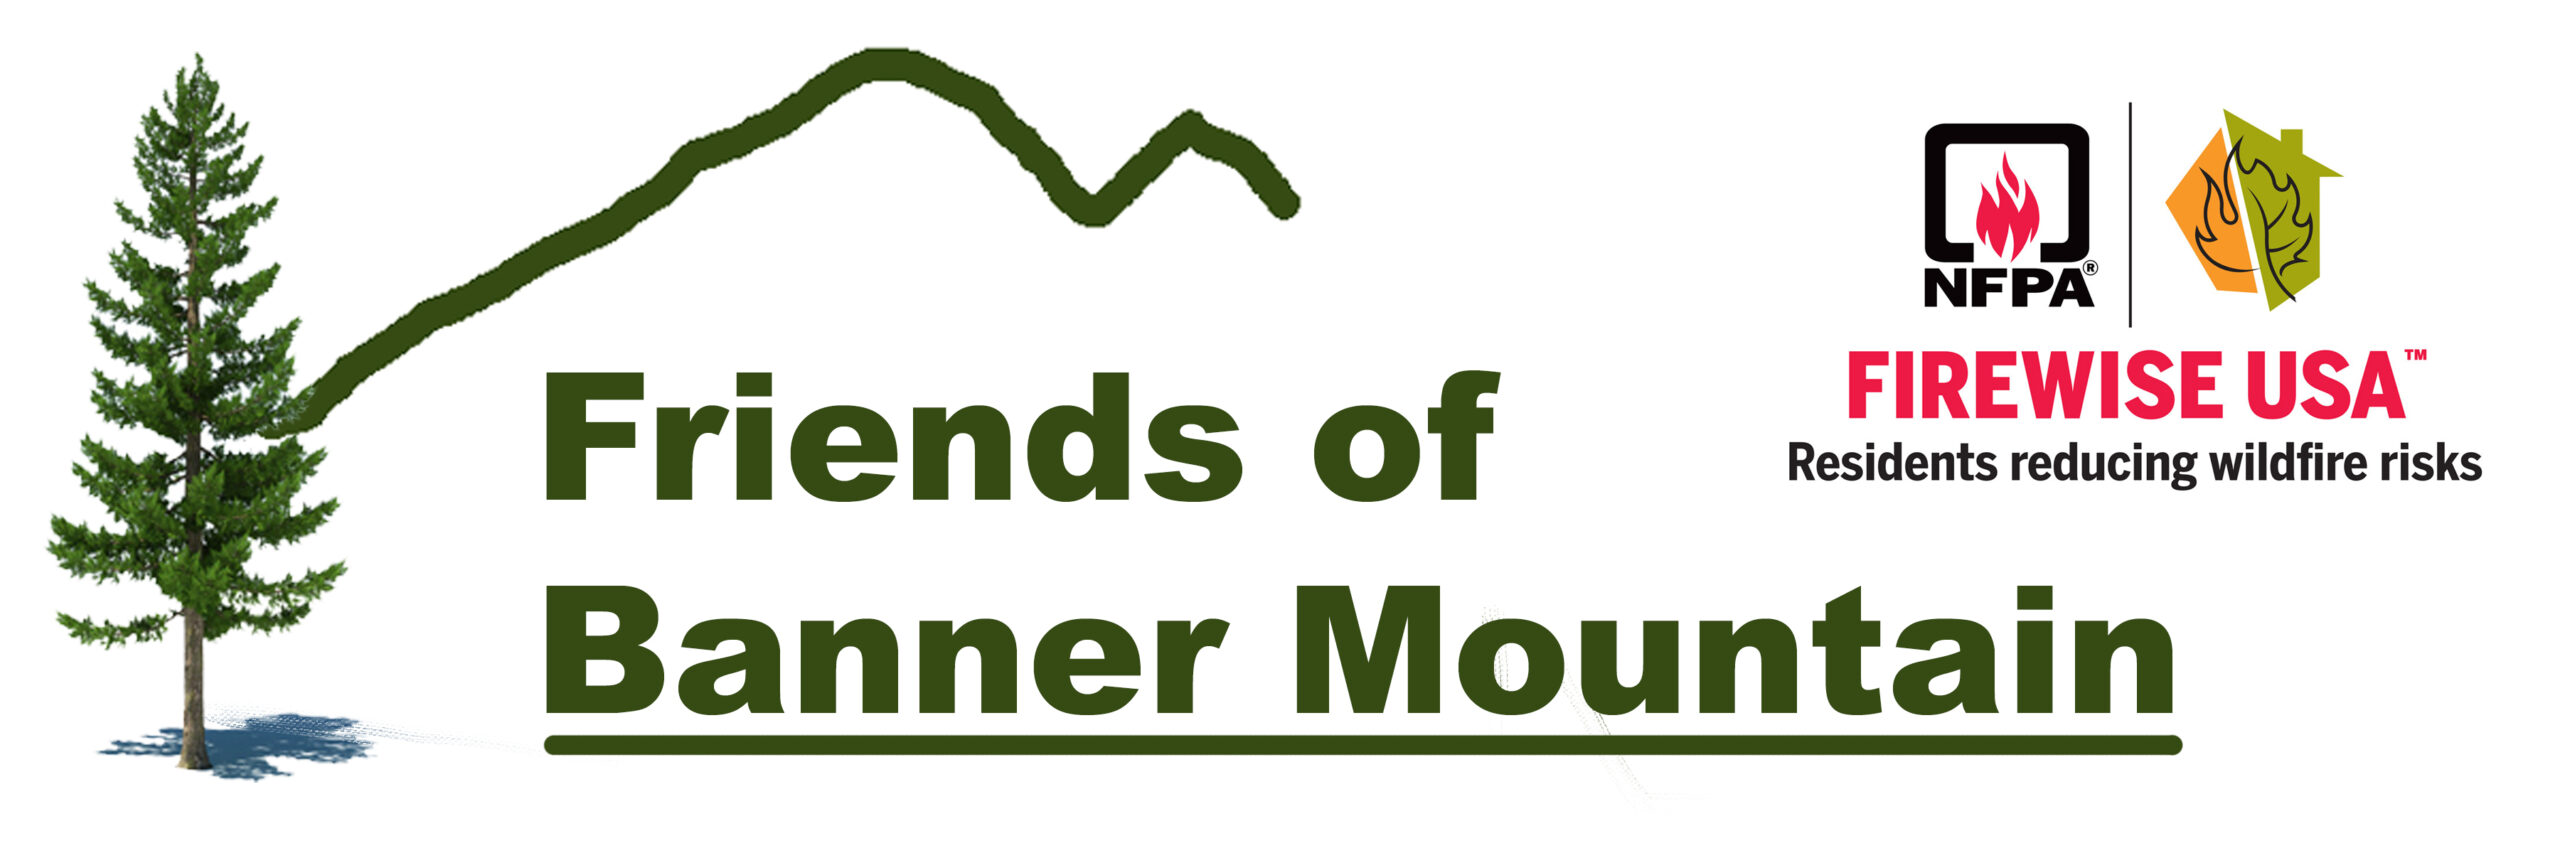 Friends of Banner Mountain